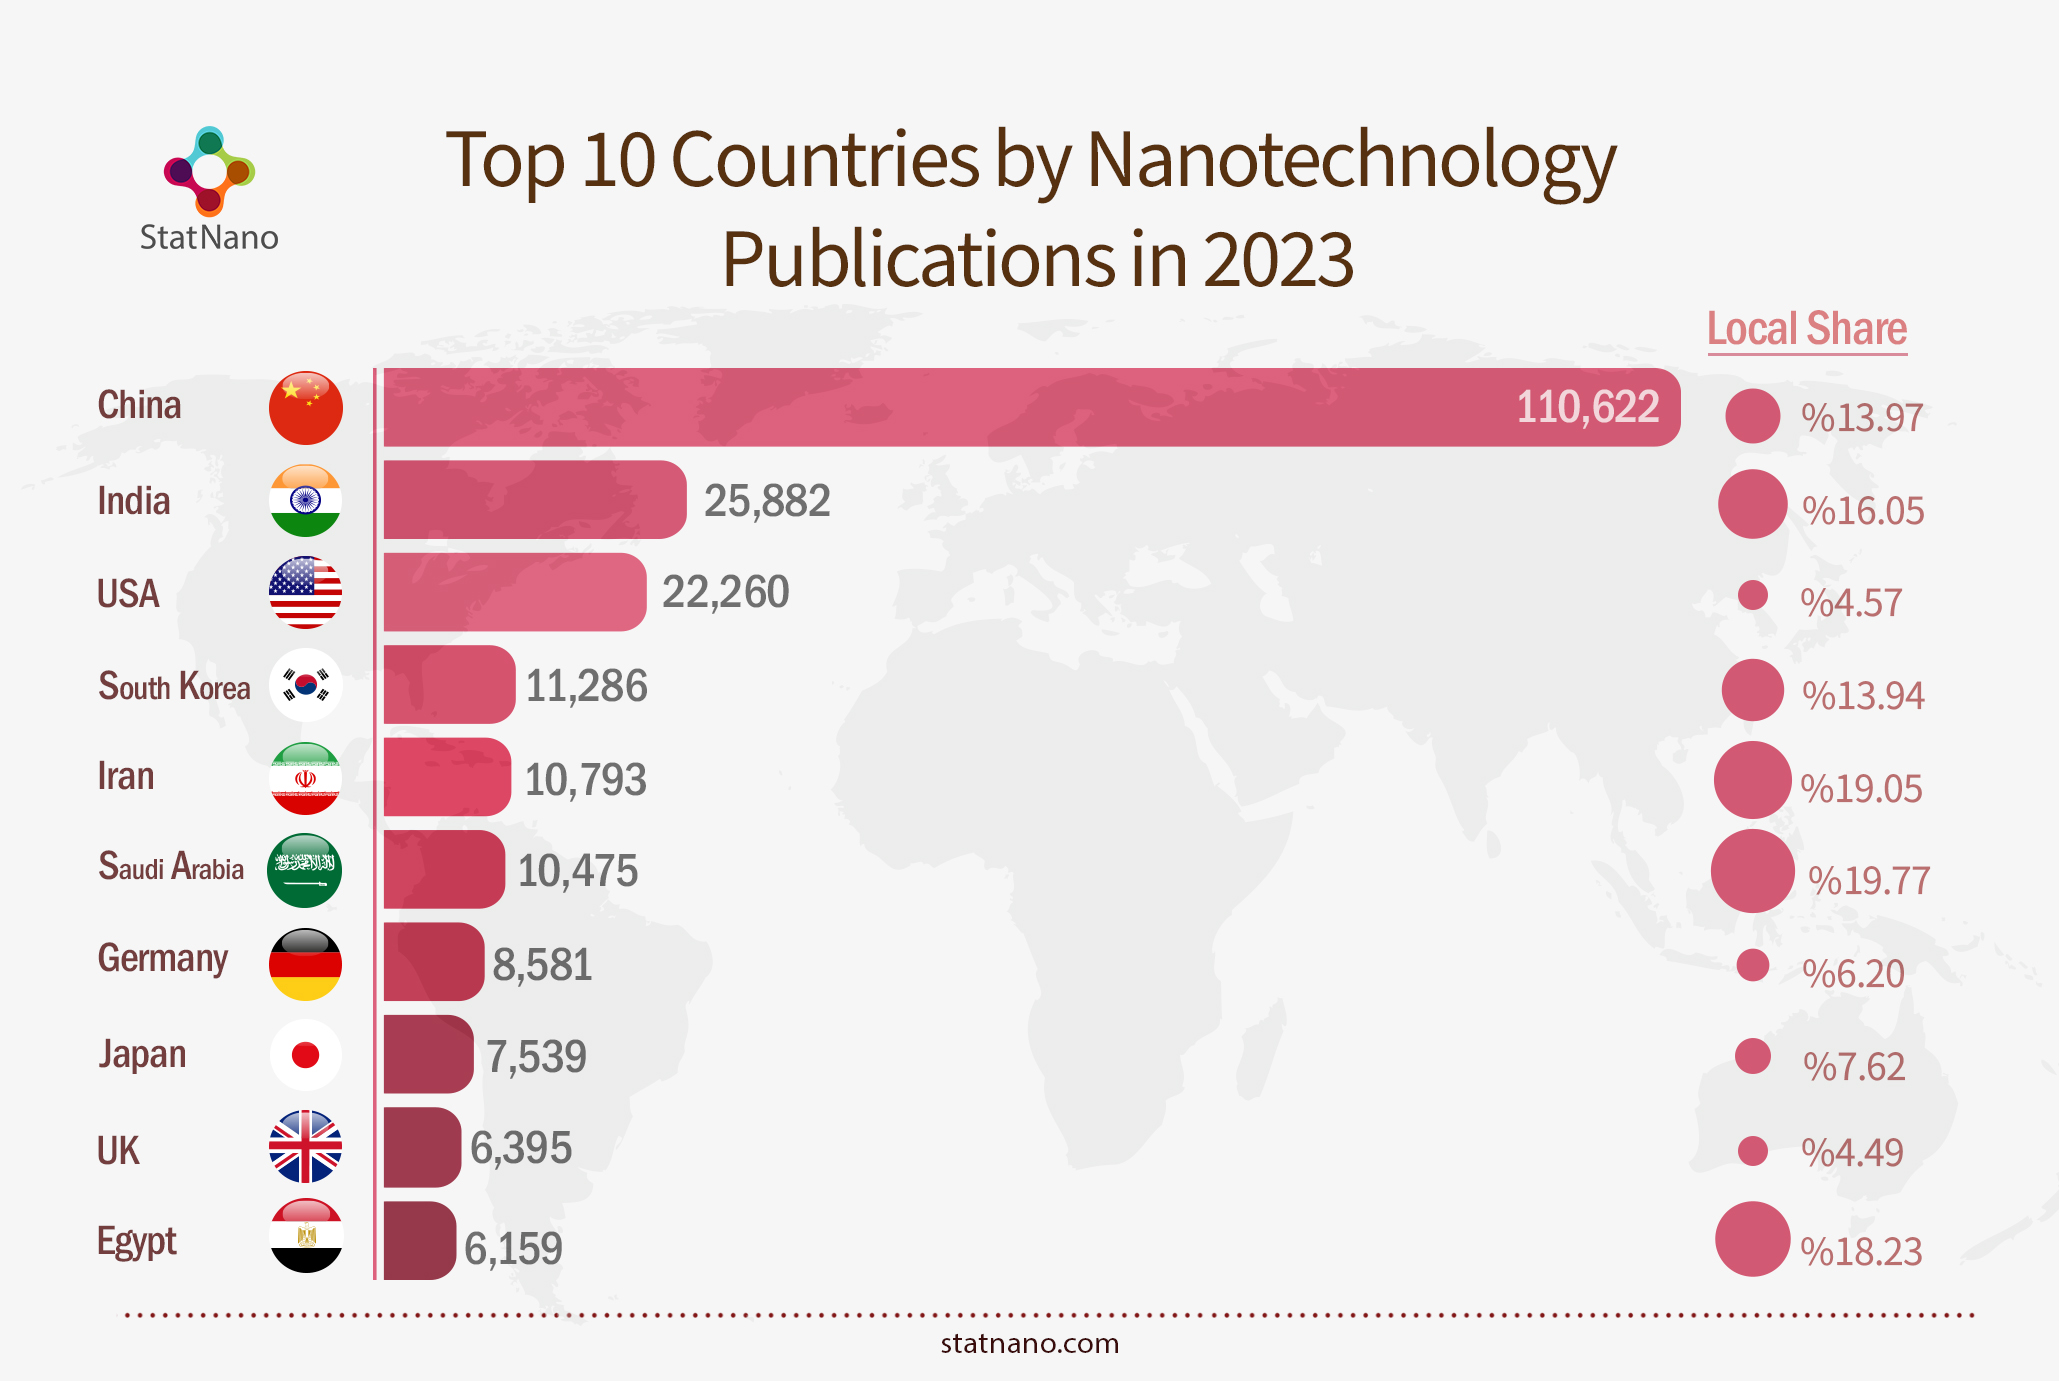 Top 10 Countries by Nanotechnology Publications in 2023